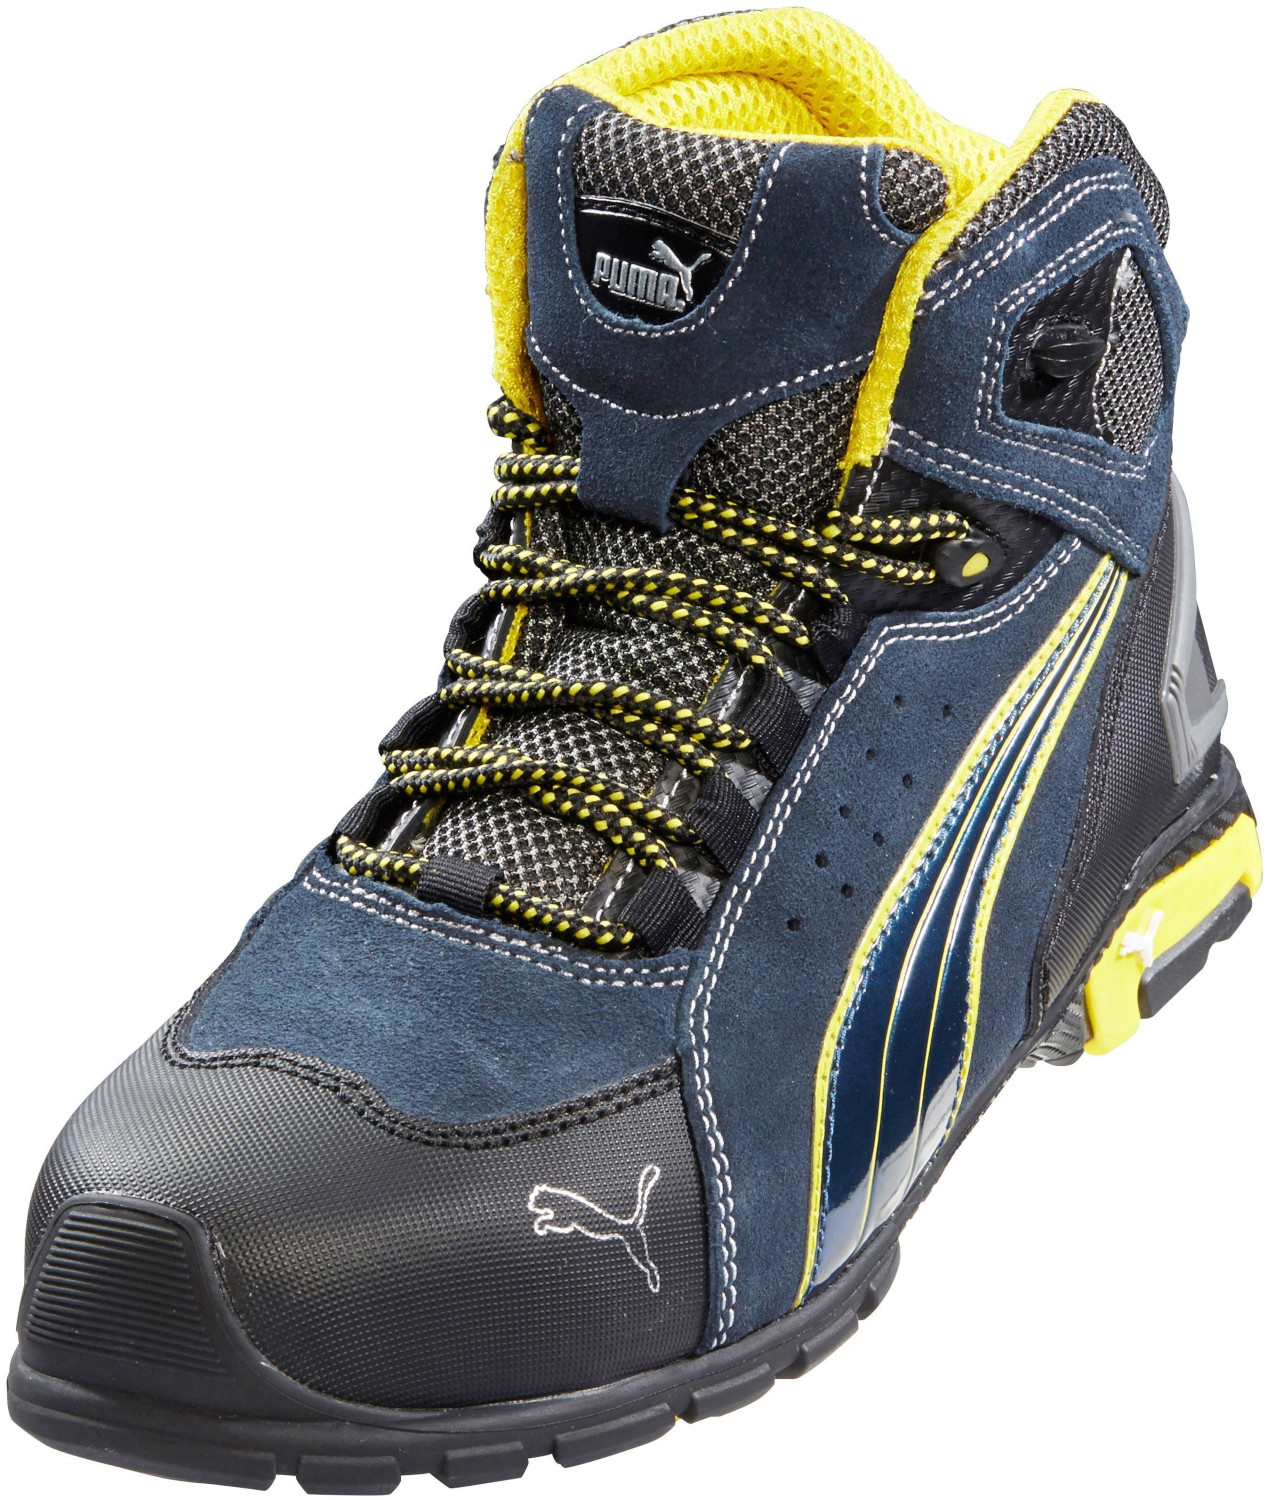 Buy Puma Safety Rio Mid (632230) from £72.59 (Today) – Best Deals on ...